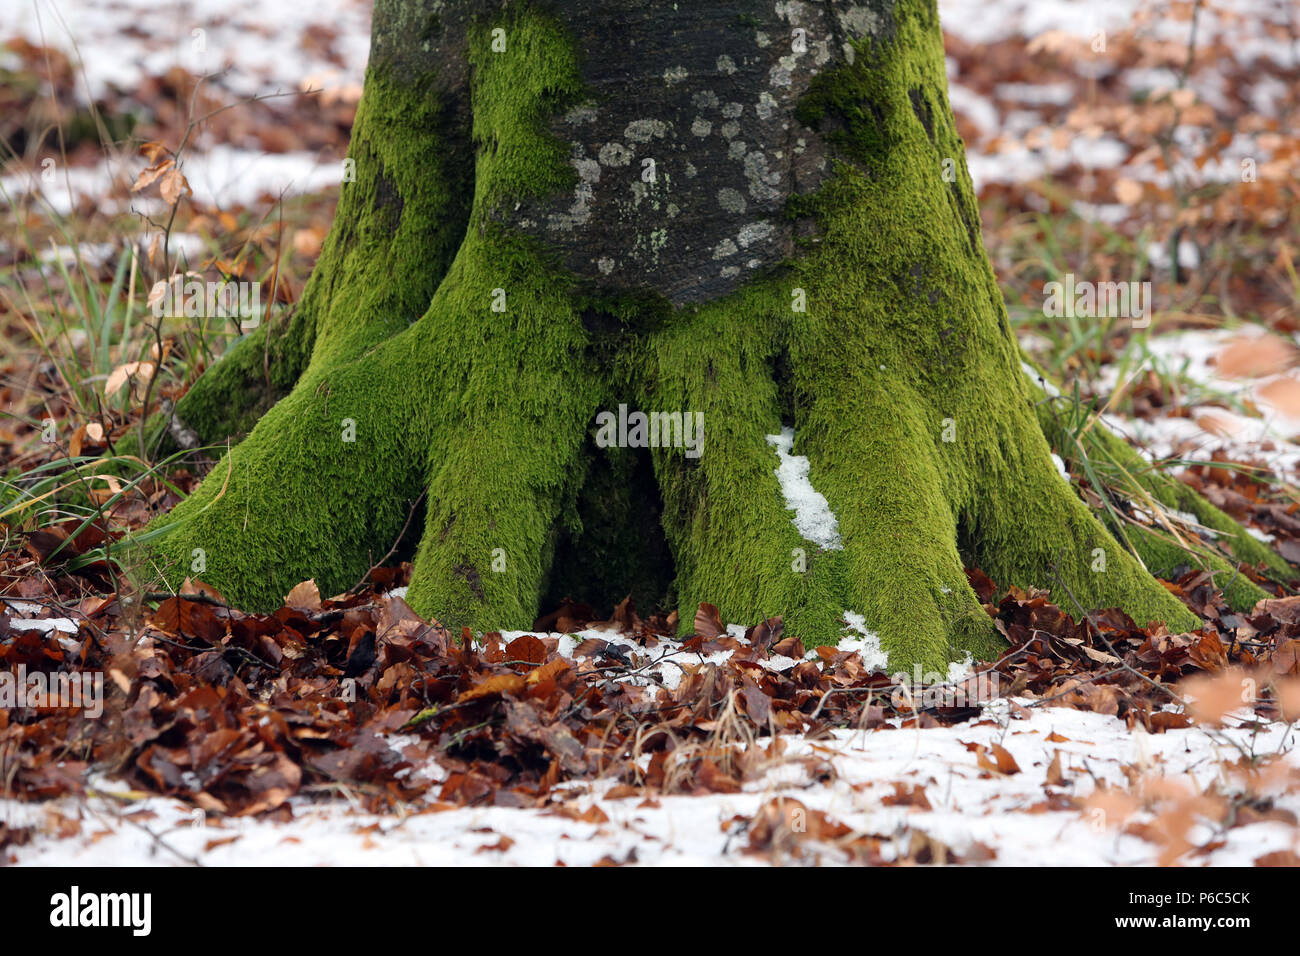 New Kaetwin, Germany - tree roots covered with moss Stock Photo